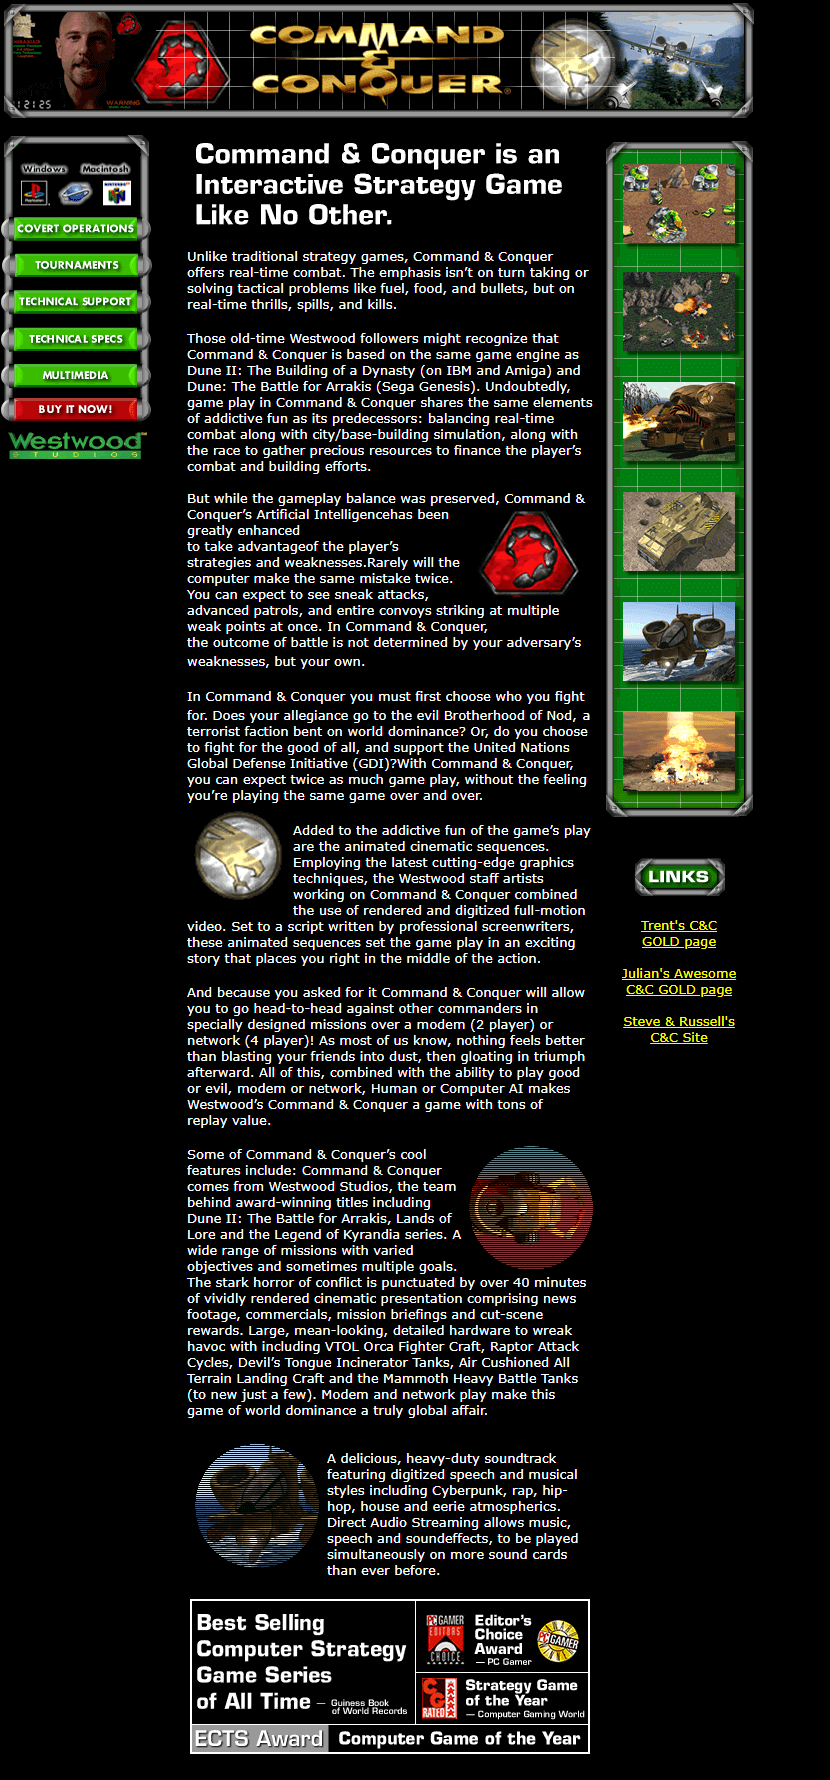 Command & Conquer website in 2000